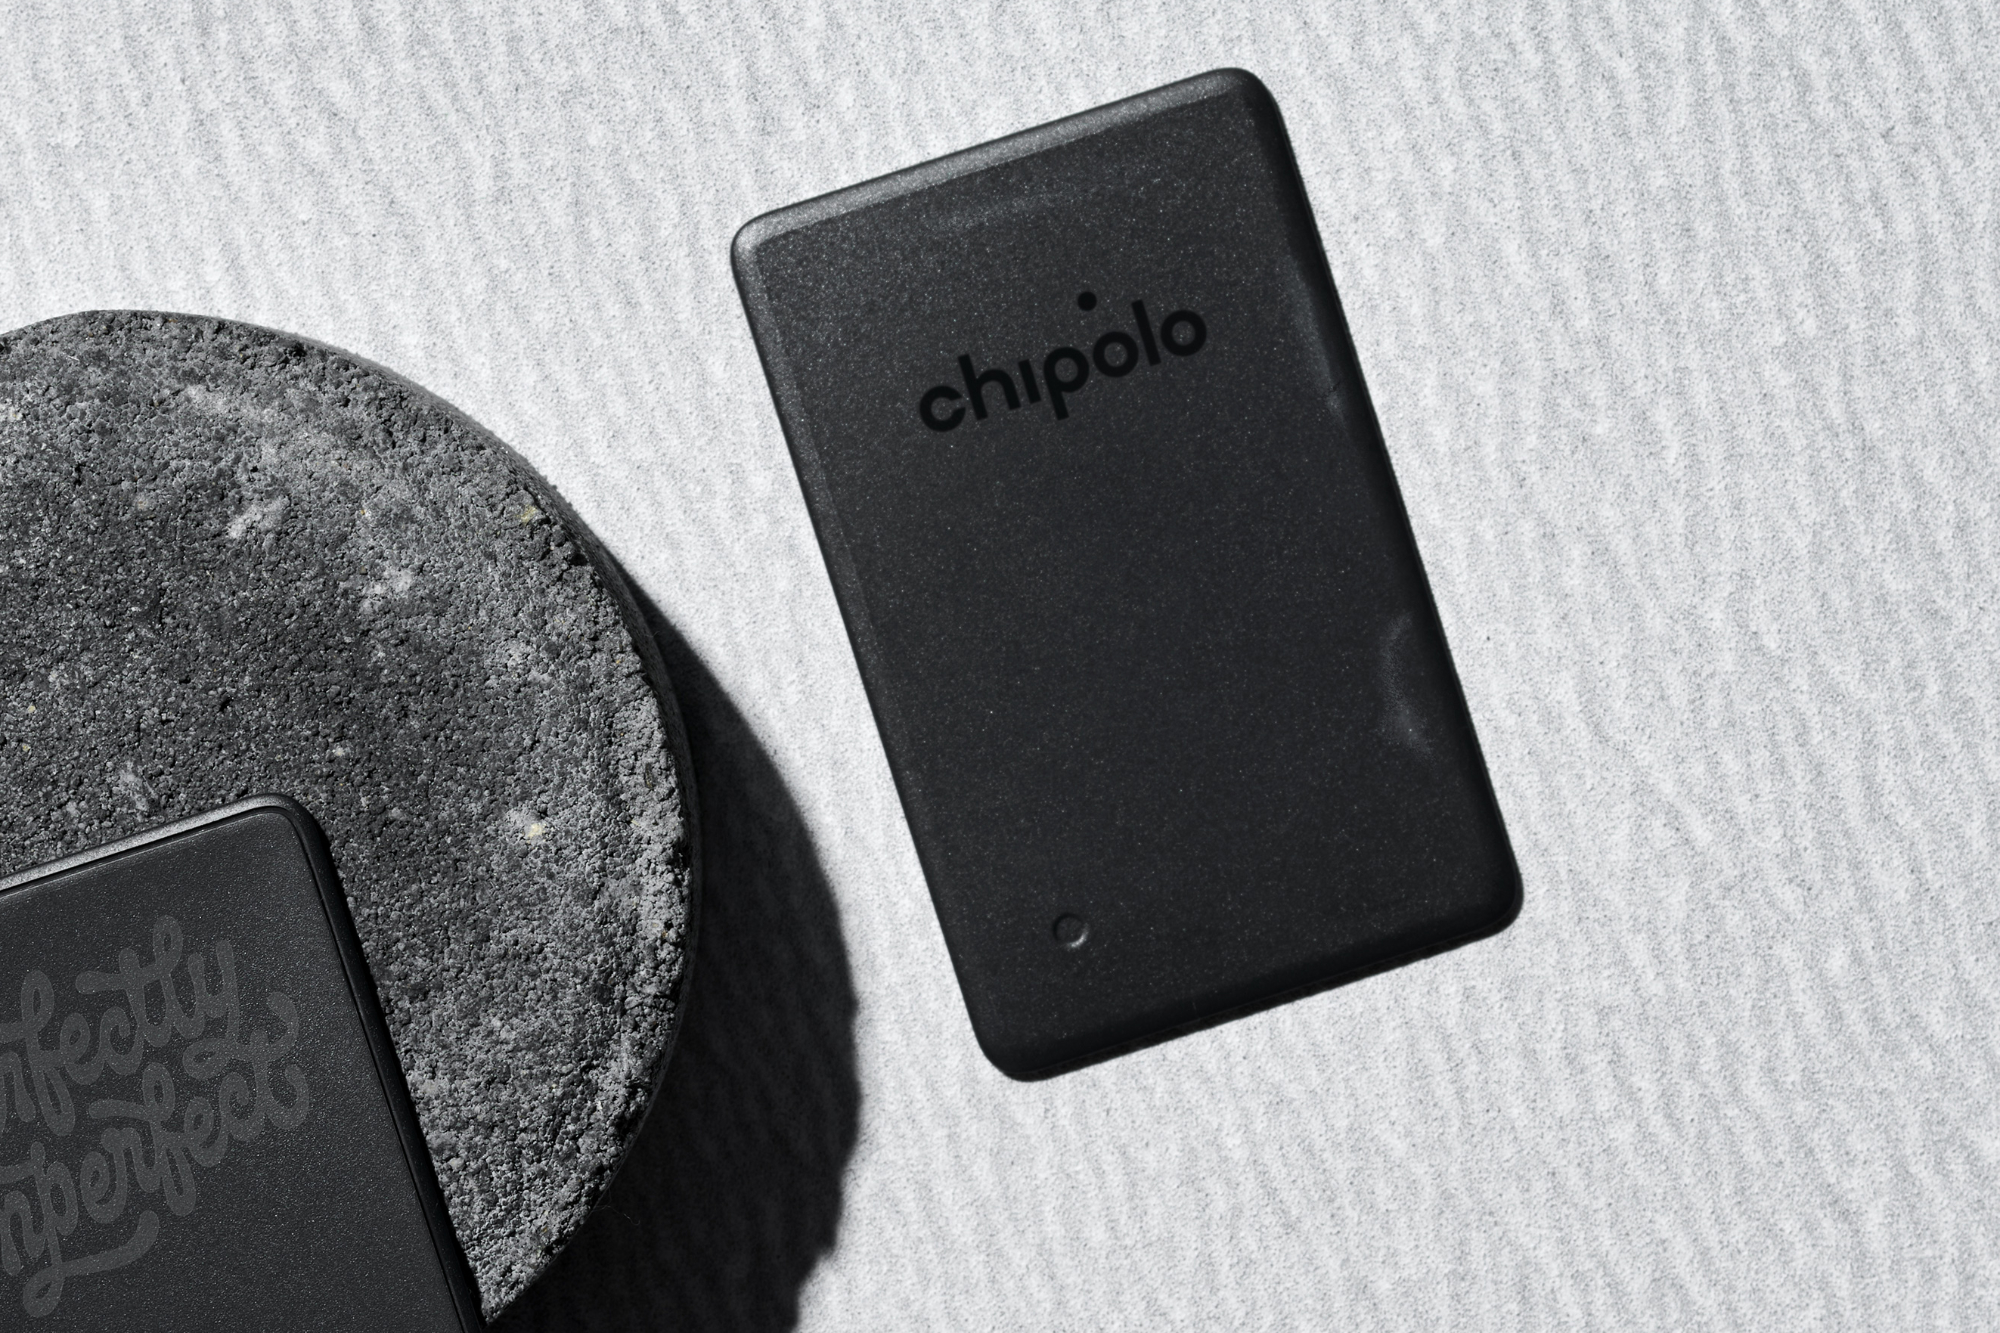 Chipolo One review: One year later, the lost item tracker still works well